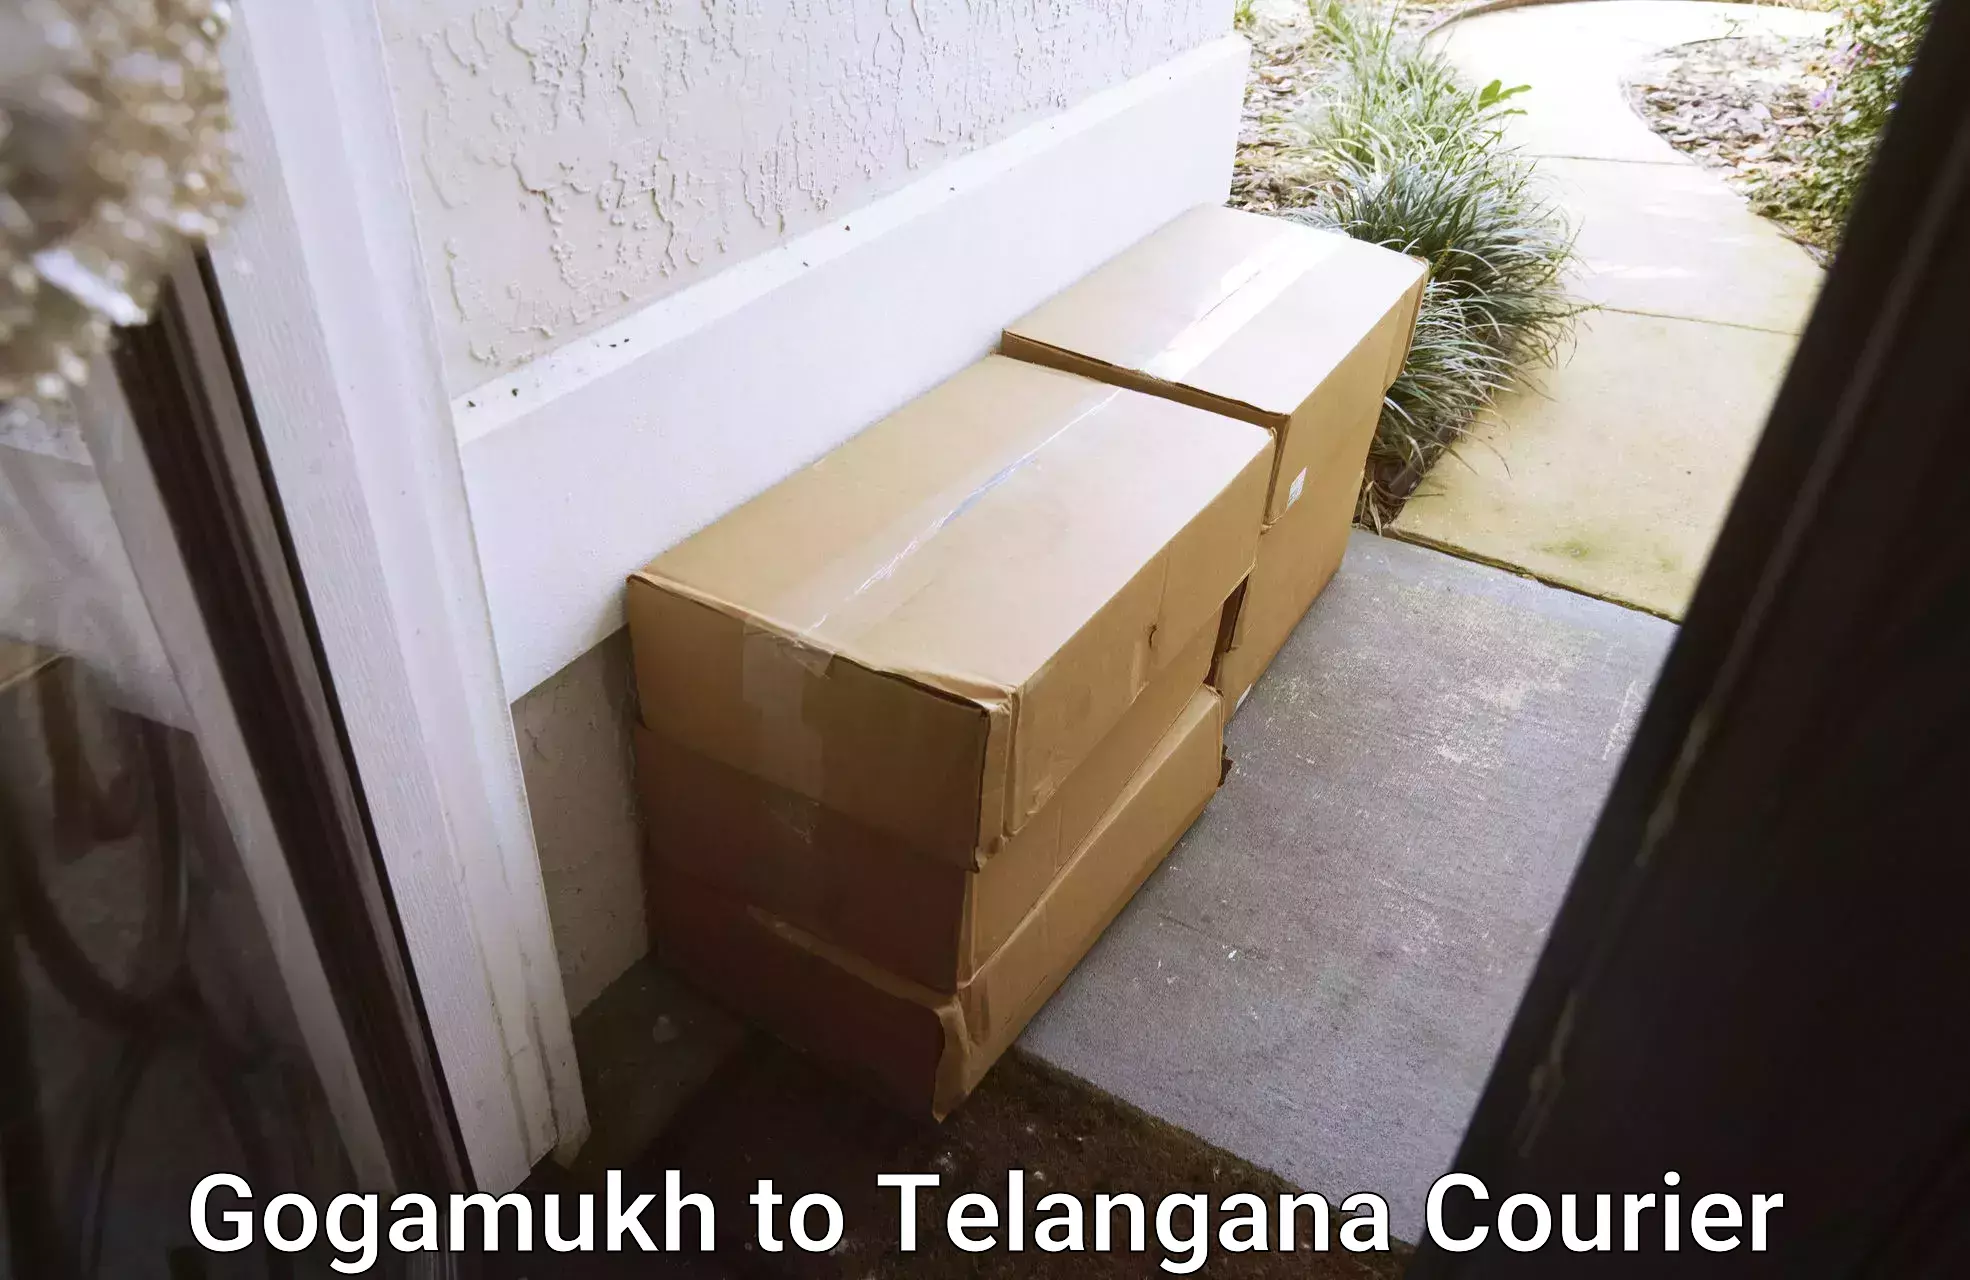 Efficient order fulfillment in Gogamukh to Danthalapally